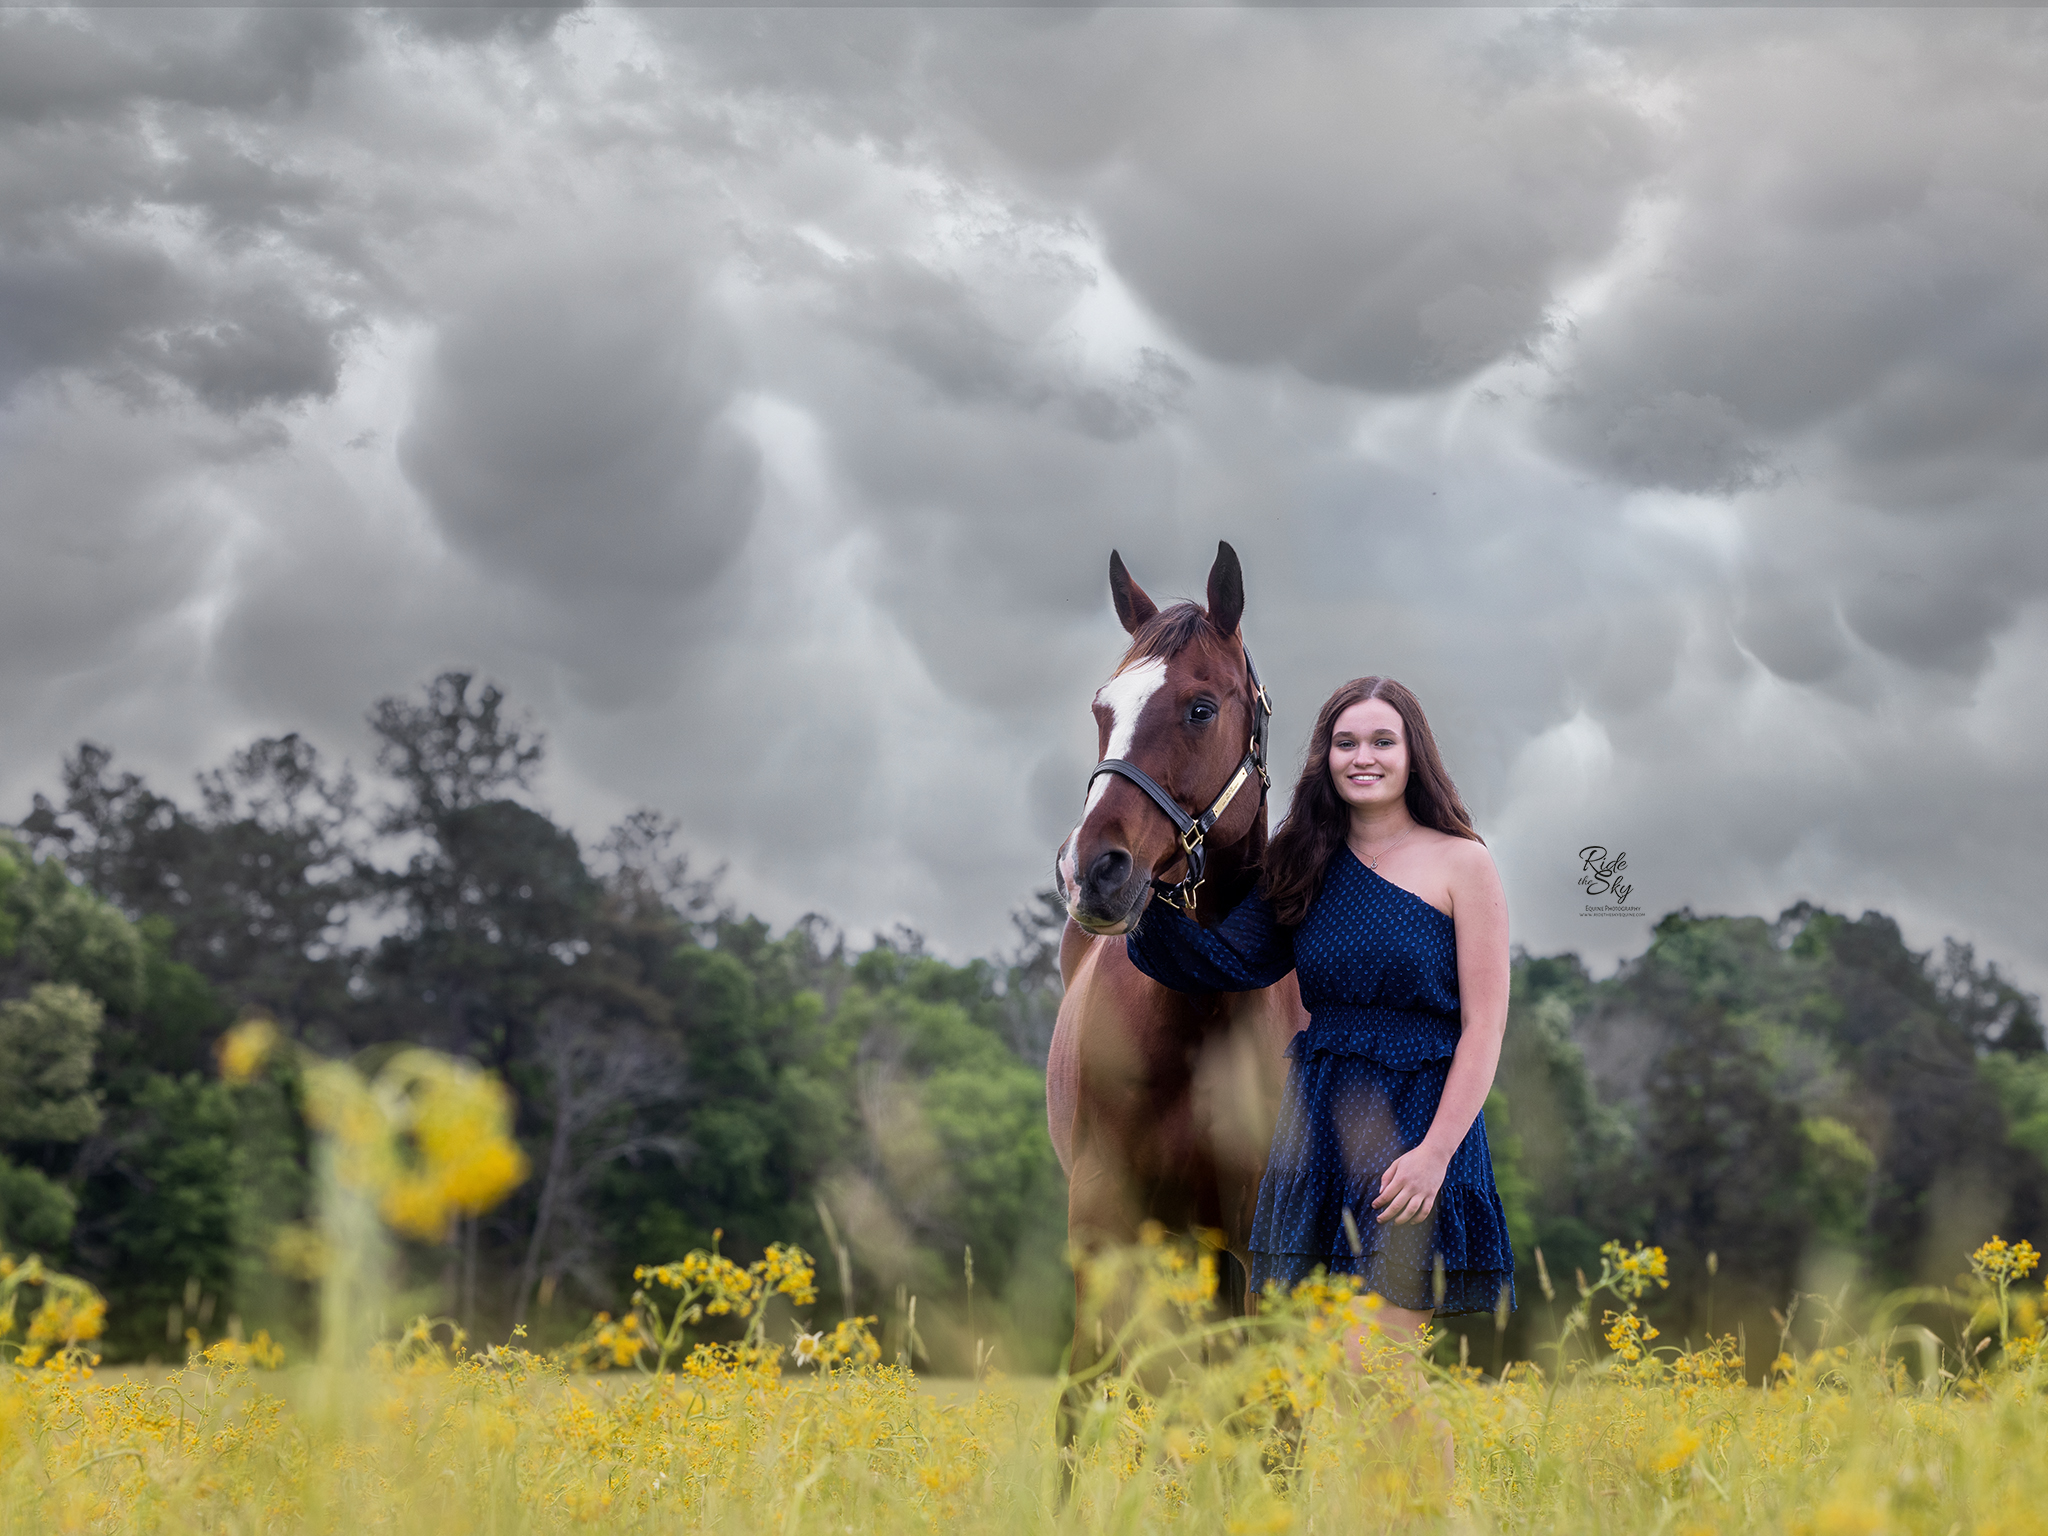 High School Senior Pictured with Her Horse in field of yellow flowers with stormy skies